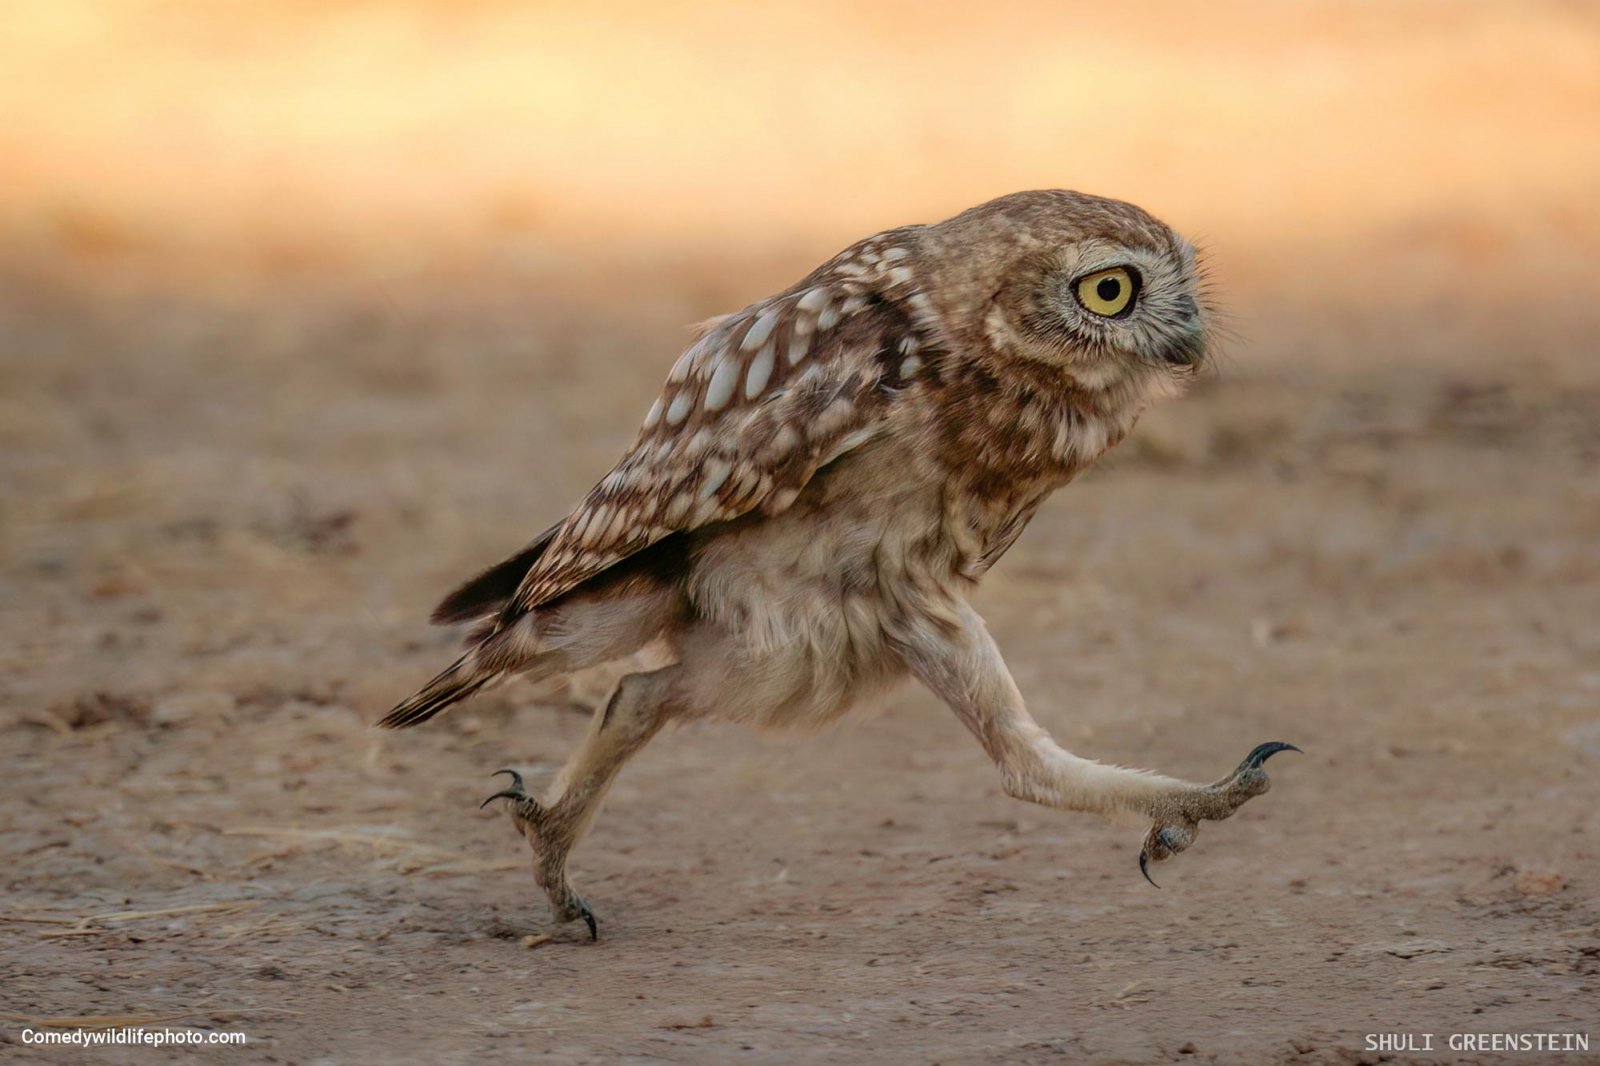 A small owl seemingly hurries as it walks across the ground with a serious look in its eye.  